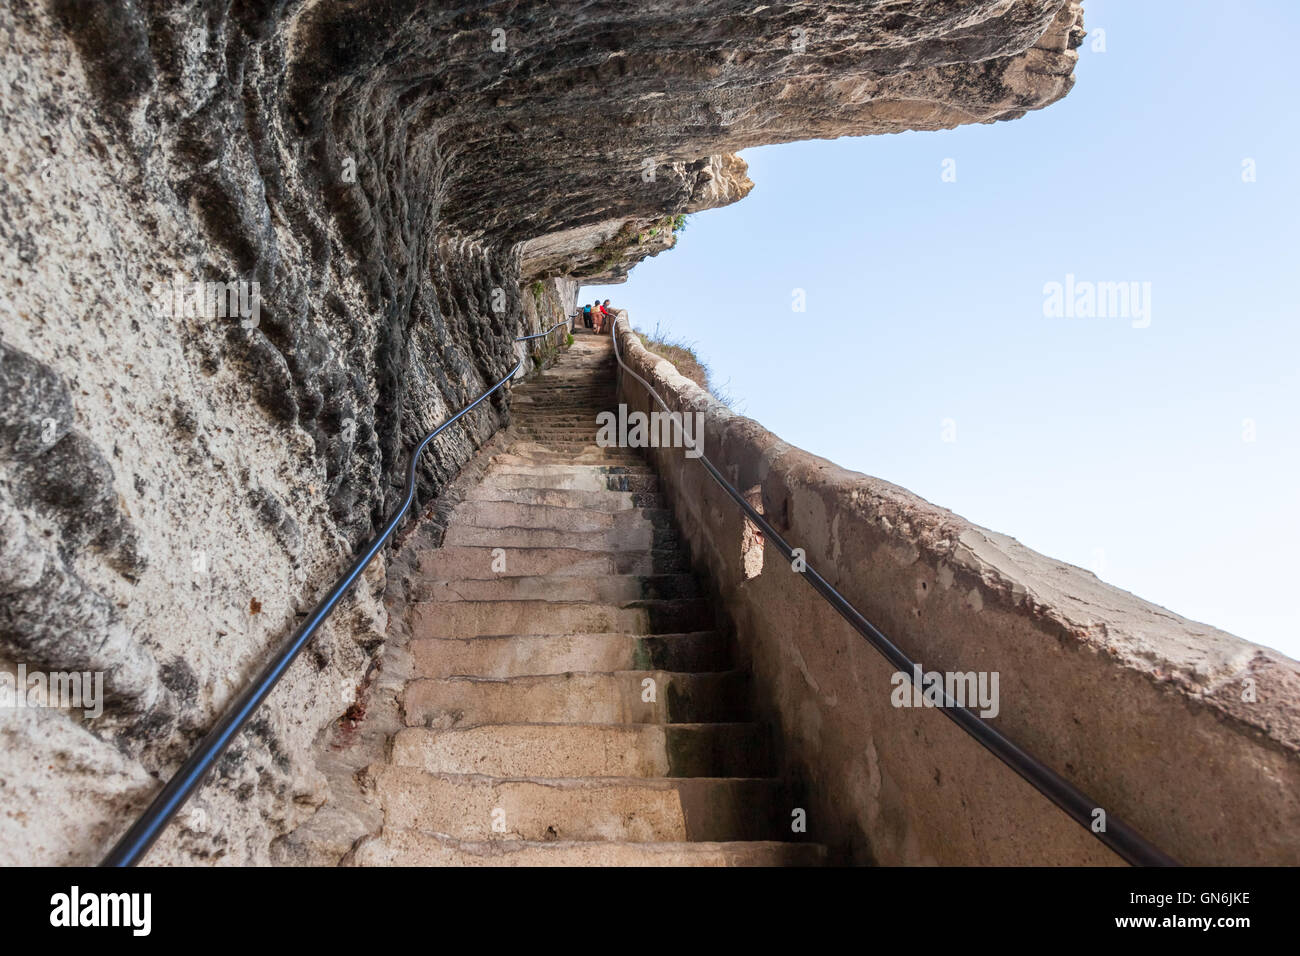 The Narrow and Steep Steps Down the Cliff Stock Photo - Image of steps,  rocks: 135575192